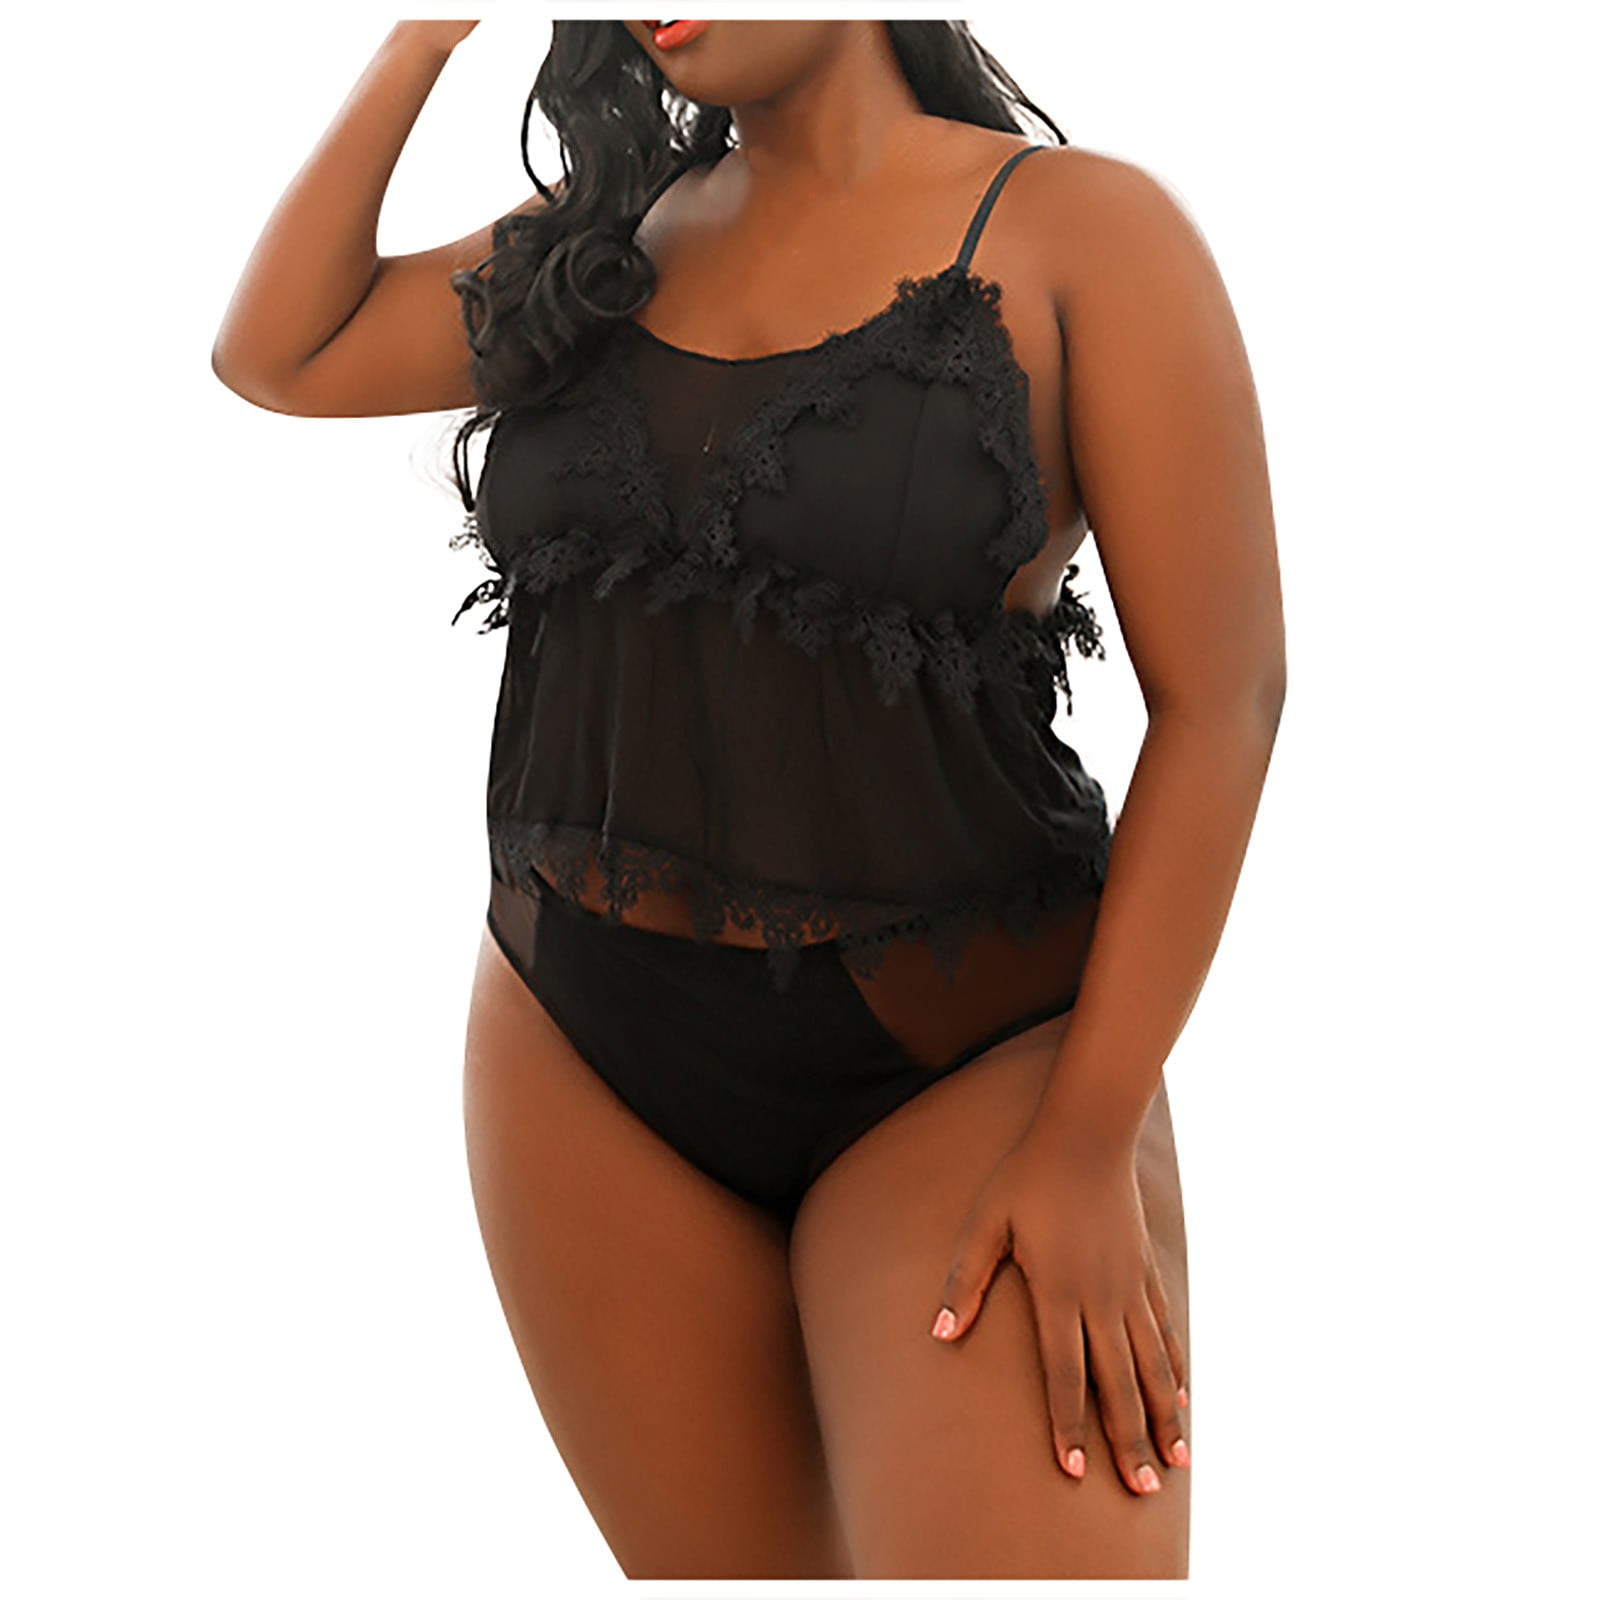 OVTICZA Womens Teddy High Waisted and Panty Sets Lace Ruffle Lingerie Plus Size Babydoll Sexy Lingerie Set Black 3XL - Walmart.com